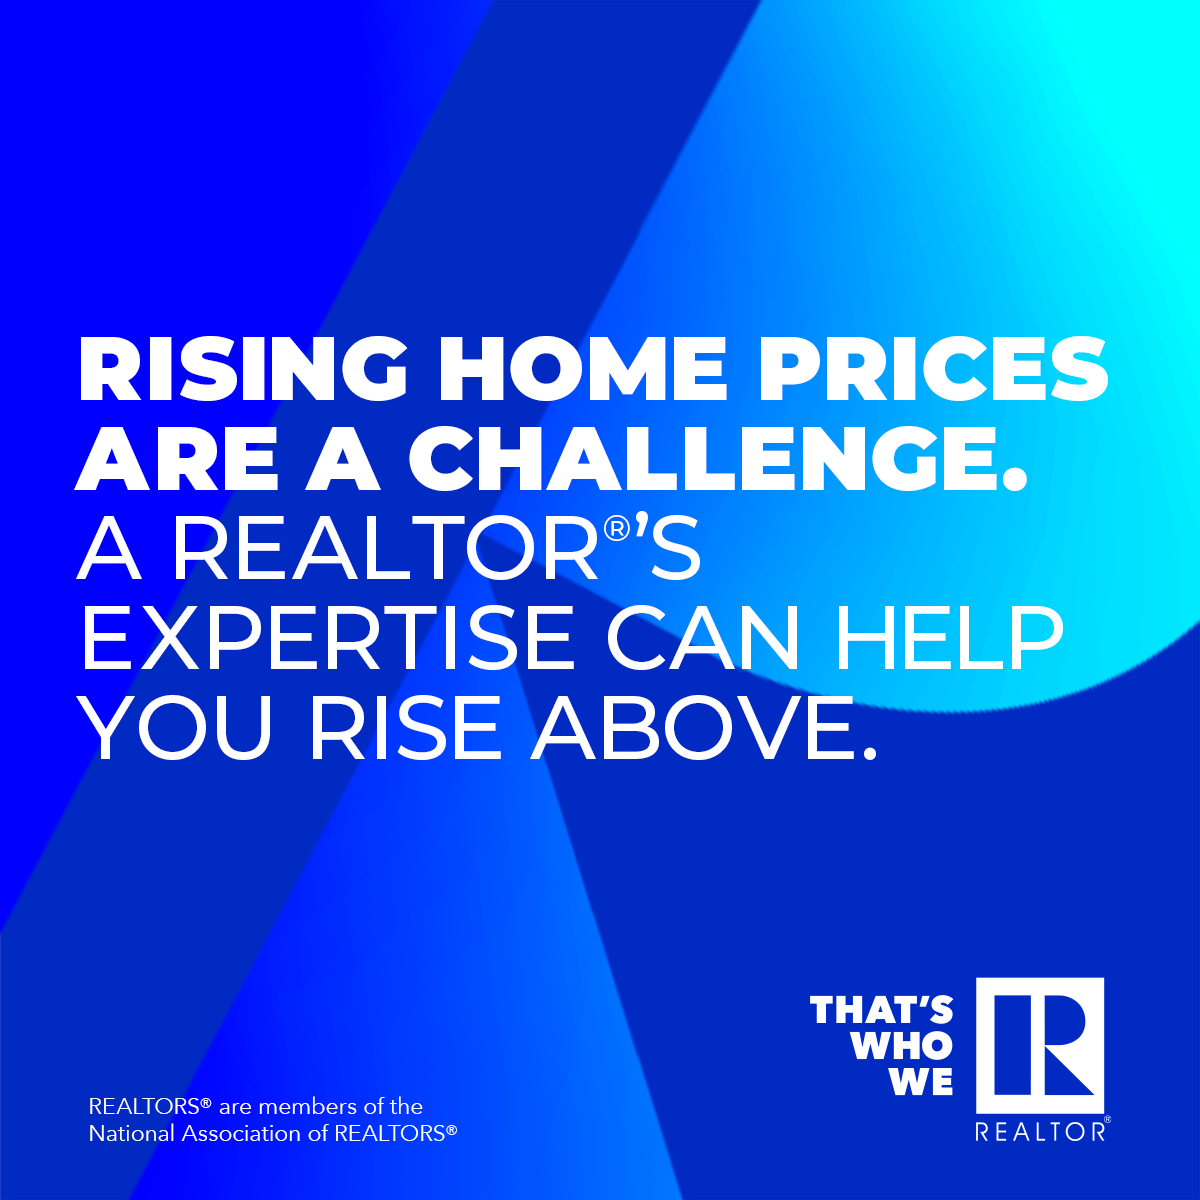 A REALTOR®'S expertise can help you rise above.